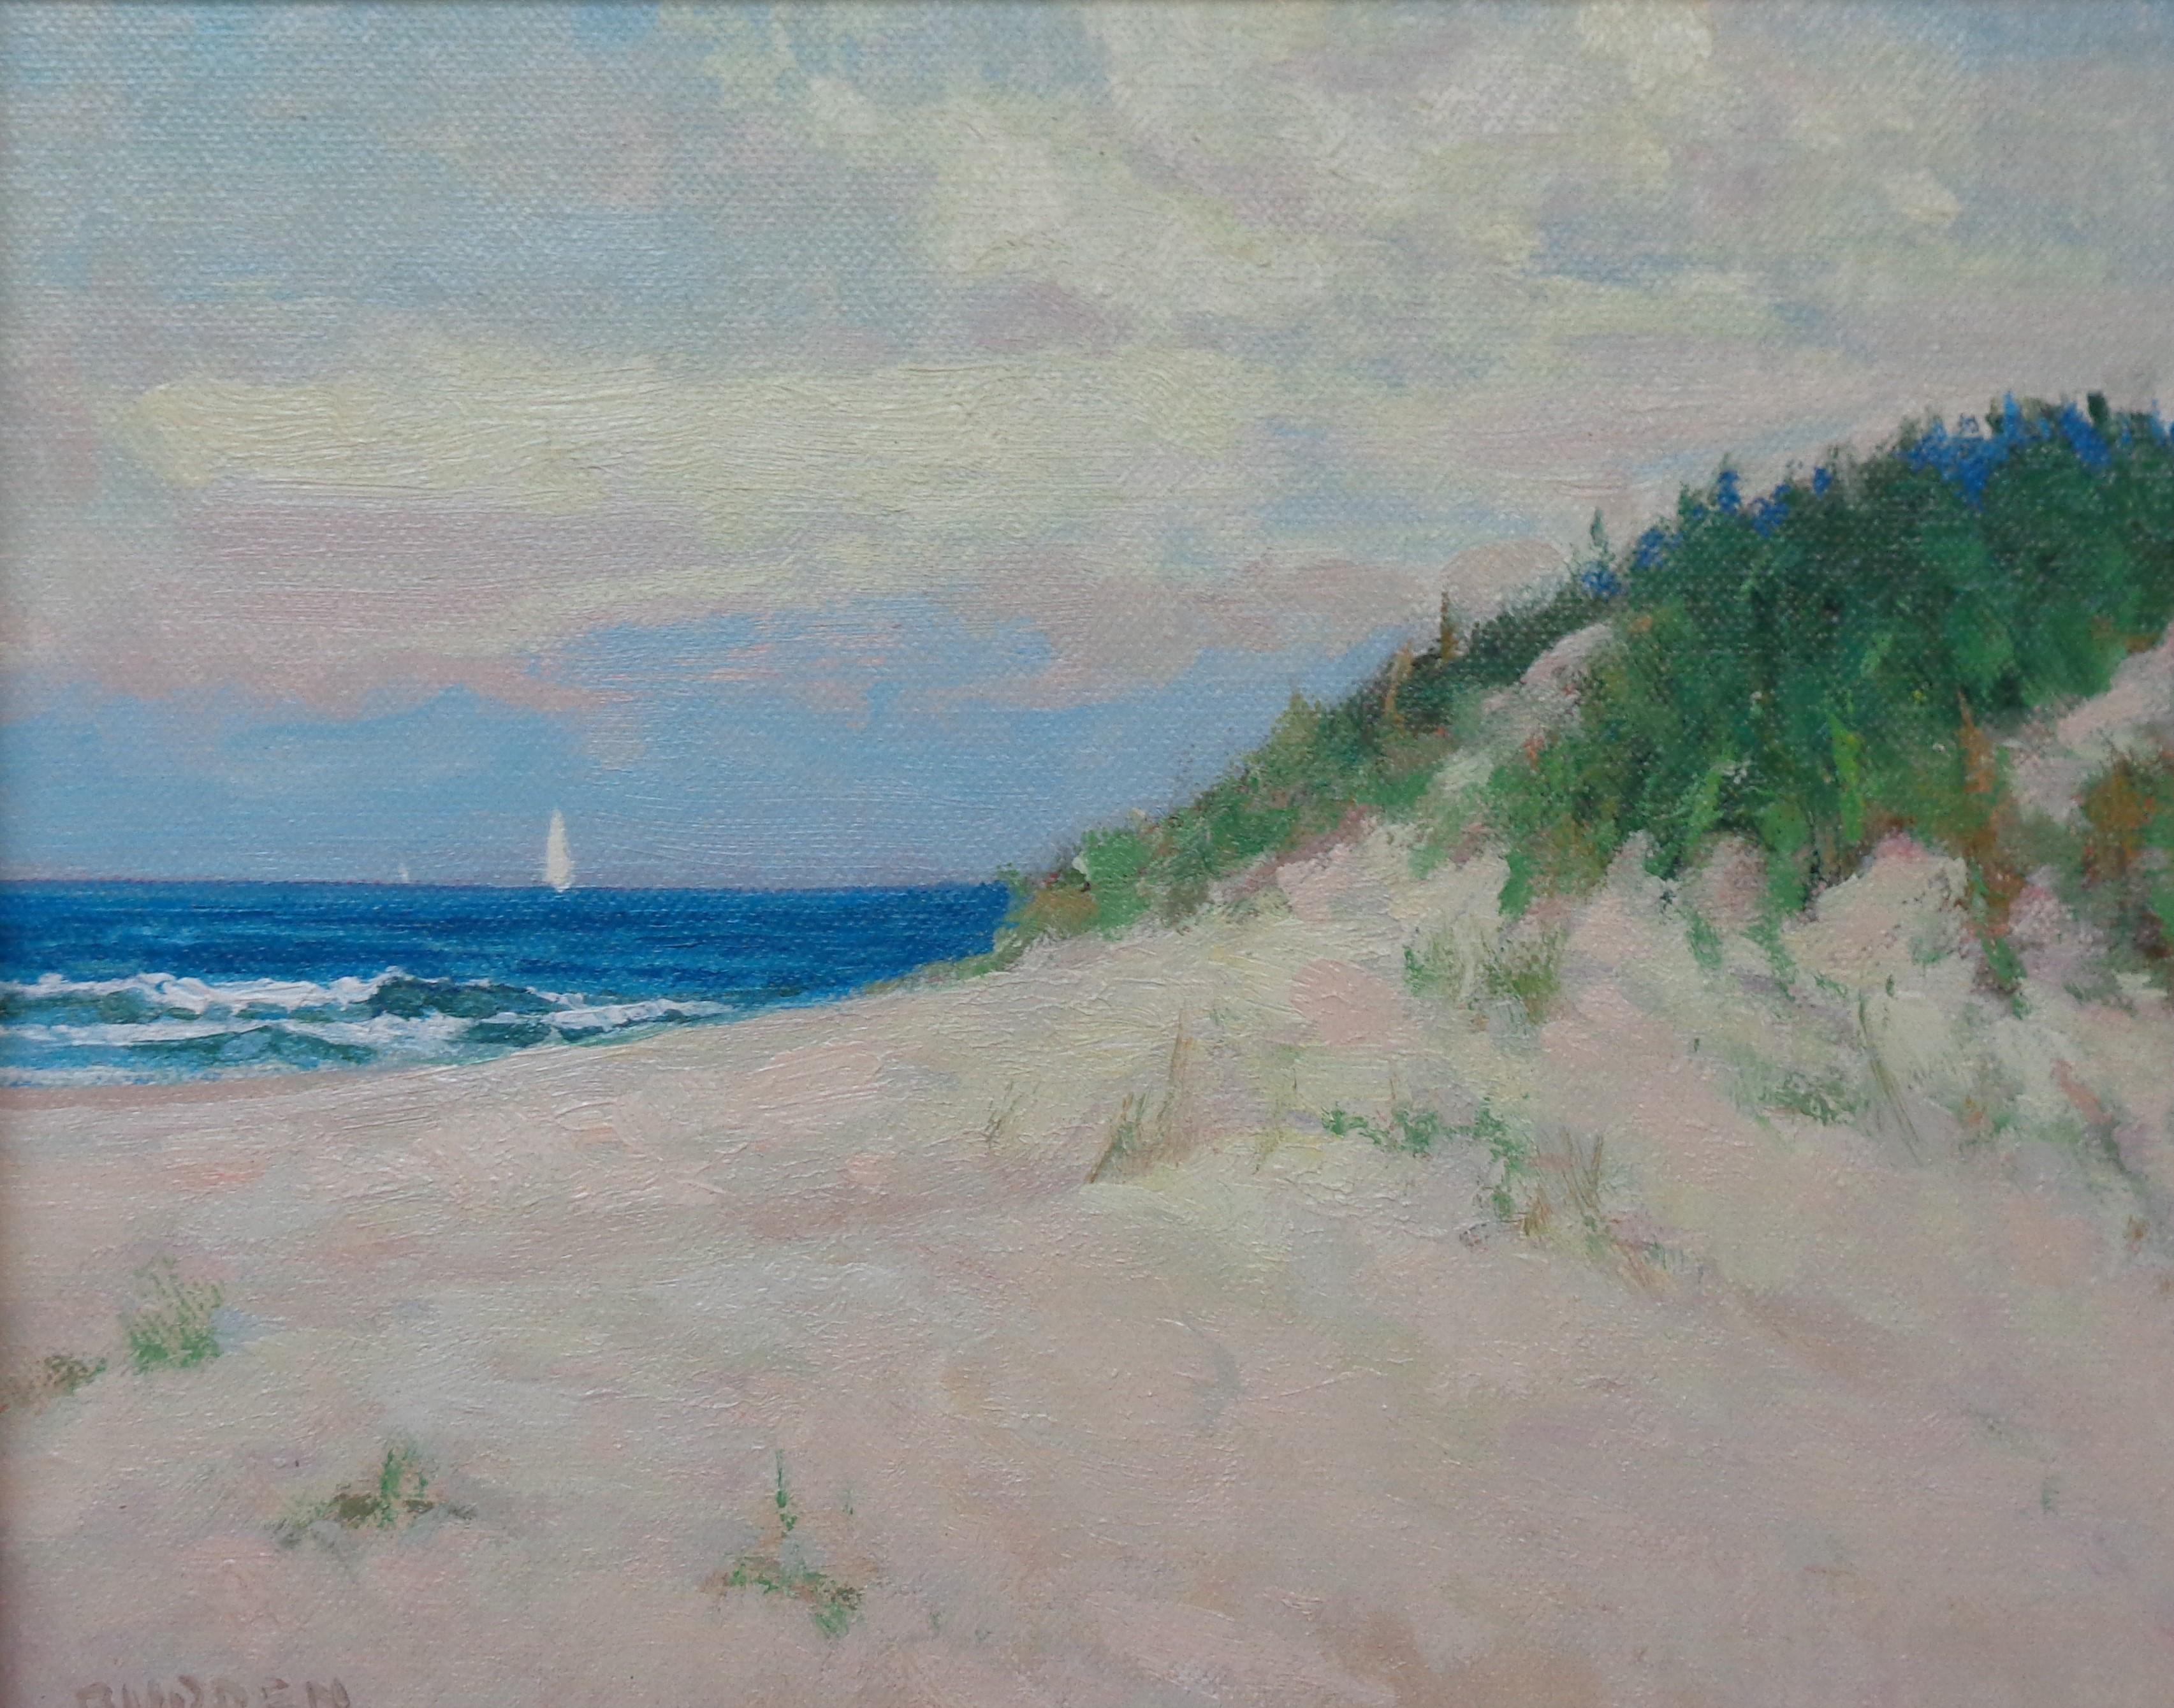 Beach & Ocean Impressionistic Seascape Oil Painting Dunes by Michael Budden For Sale 1